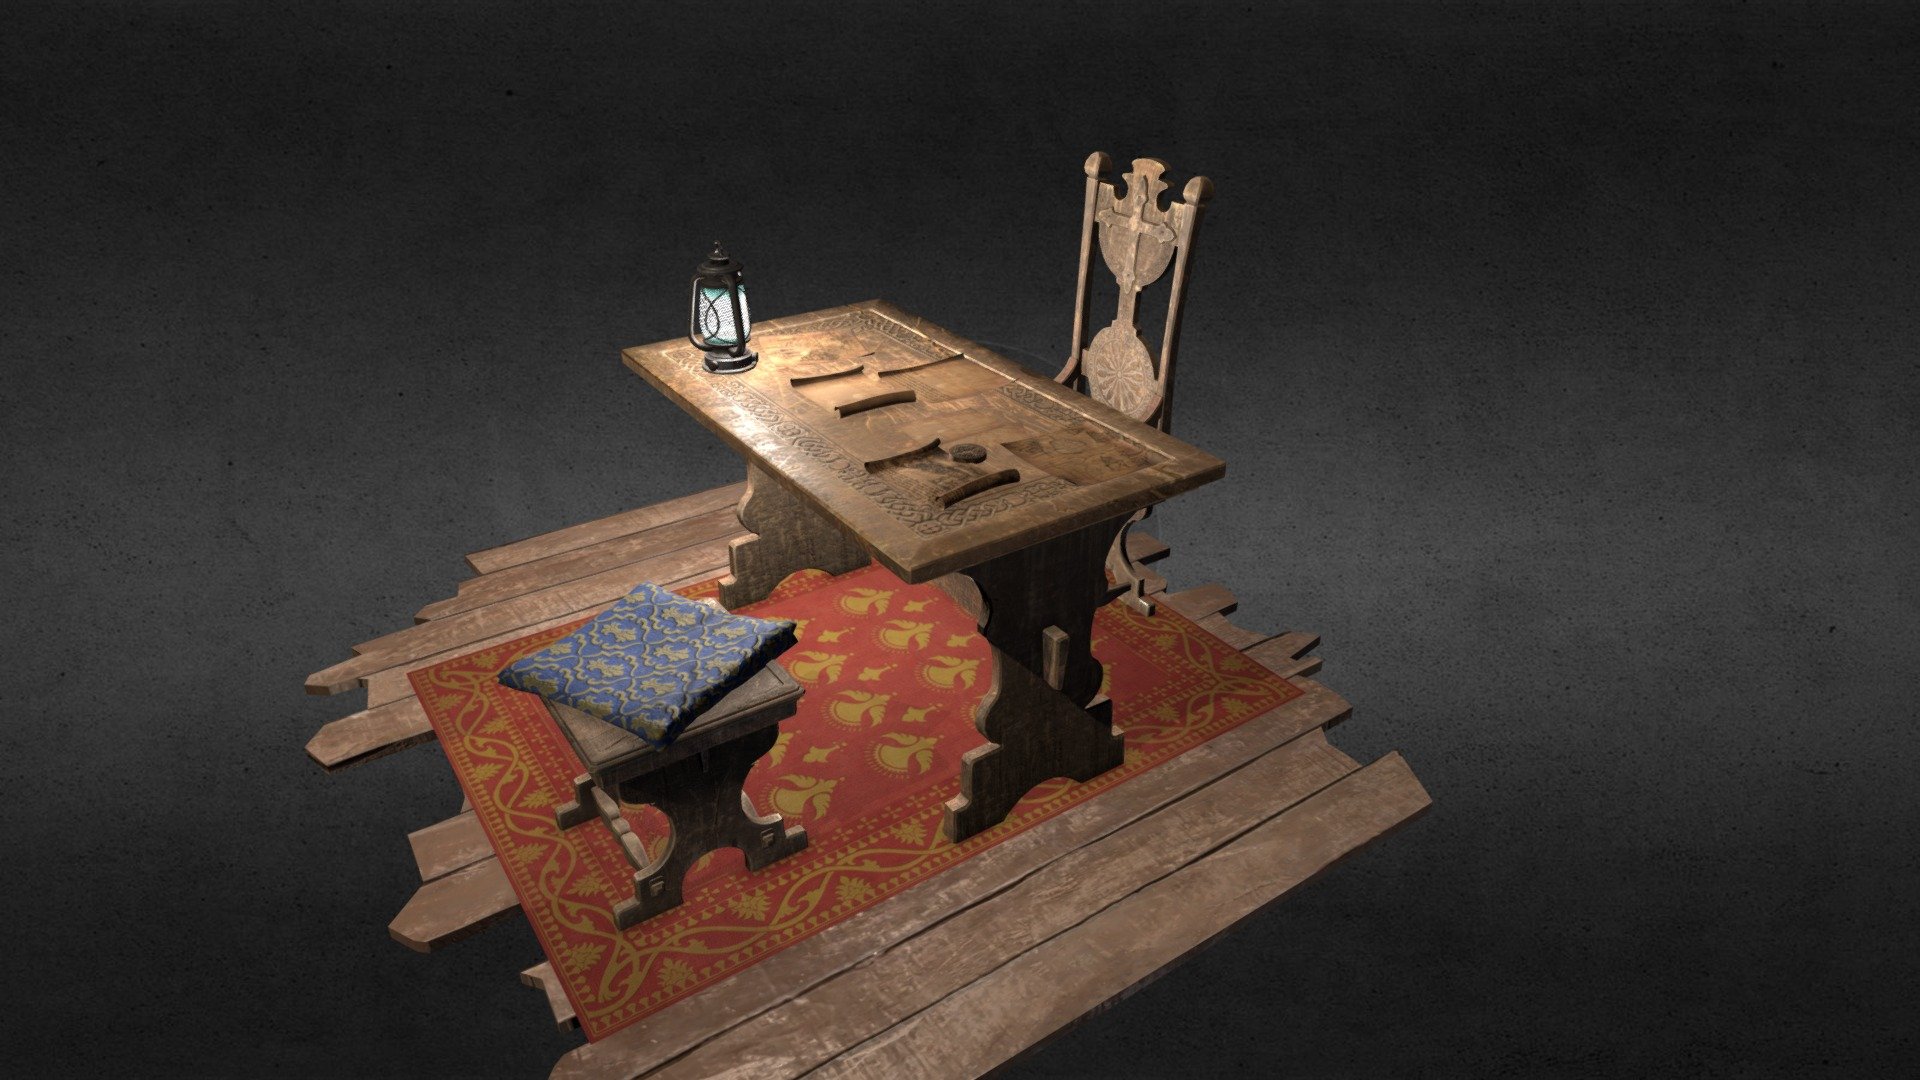 Old sketches and notes on the desk. This scene is set in medieval times.
Music by great musician and friend 

AN https://soundcloud.com/deshaadman

My website: https://conradjustin.com/portfolio/ Twitter: twitter.com/ConradJustinArt - Medieval desk - Download Free 3D model by Conrad Justin (@ConradJustin) 3d model